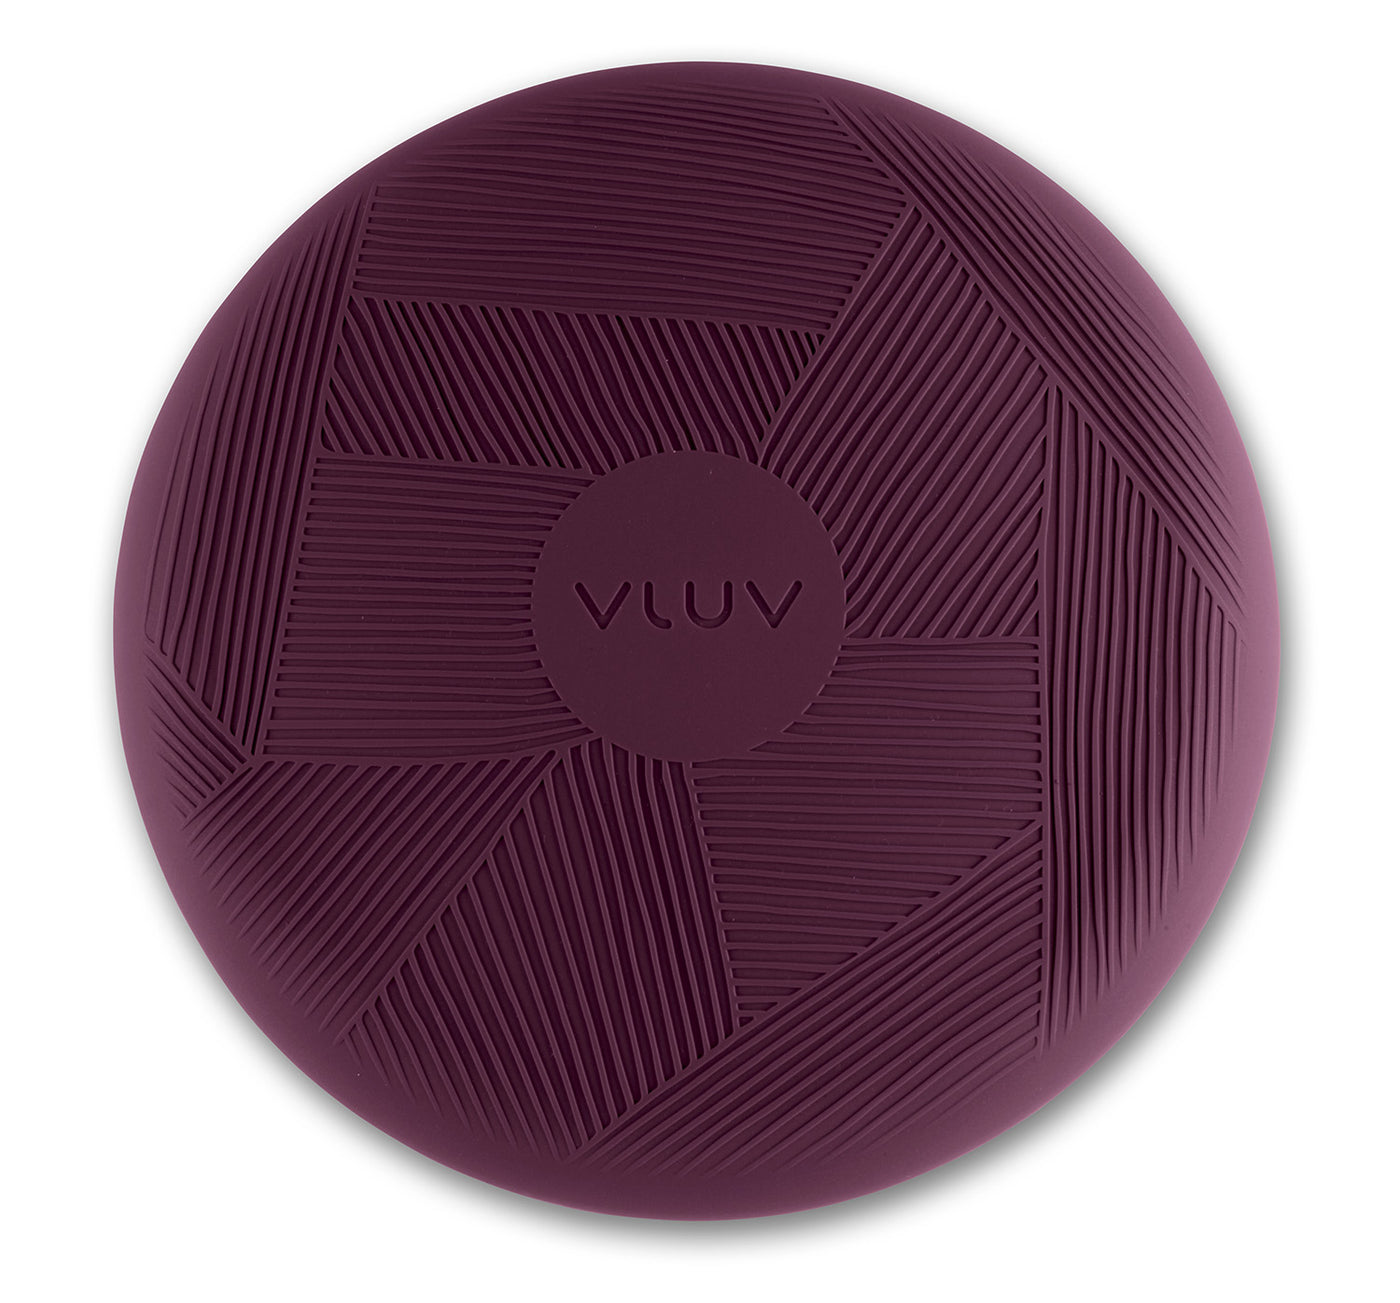 VLUV PED balance cushion 36cm in 3 colors